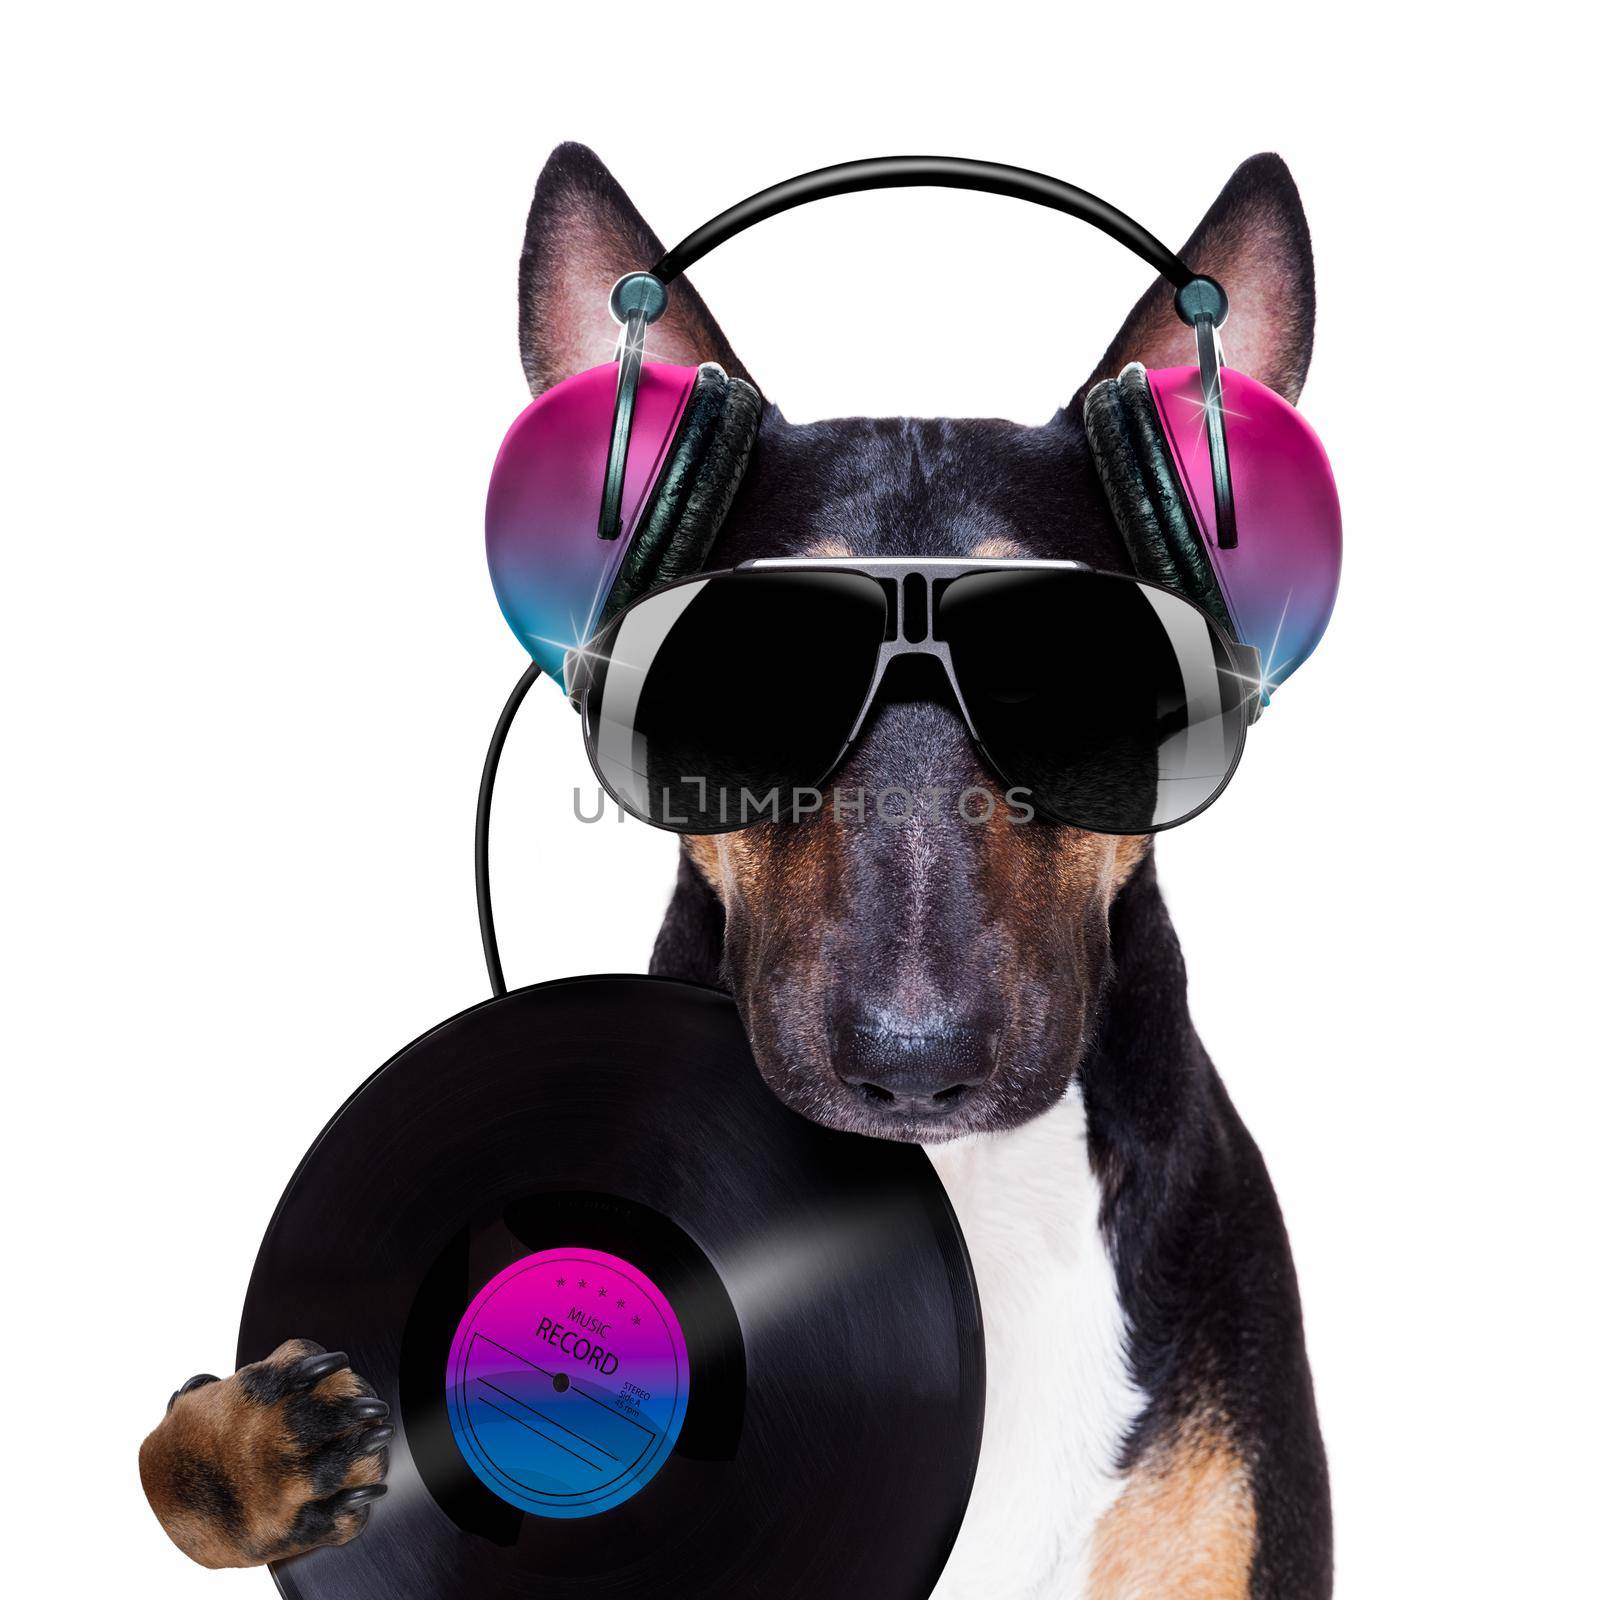 Dj bull terrier dog playing music in a club with disco ball , isolated on white background, with vinyl record